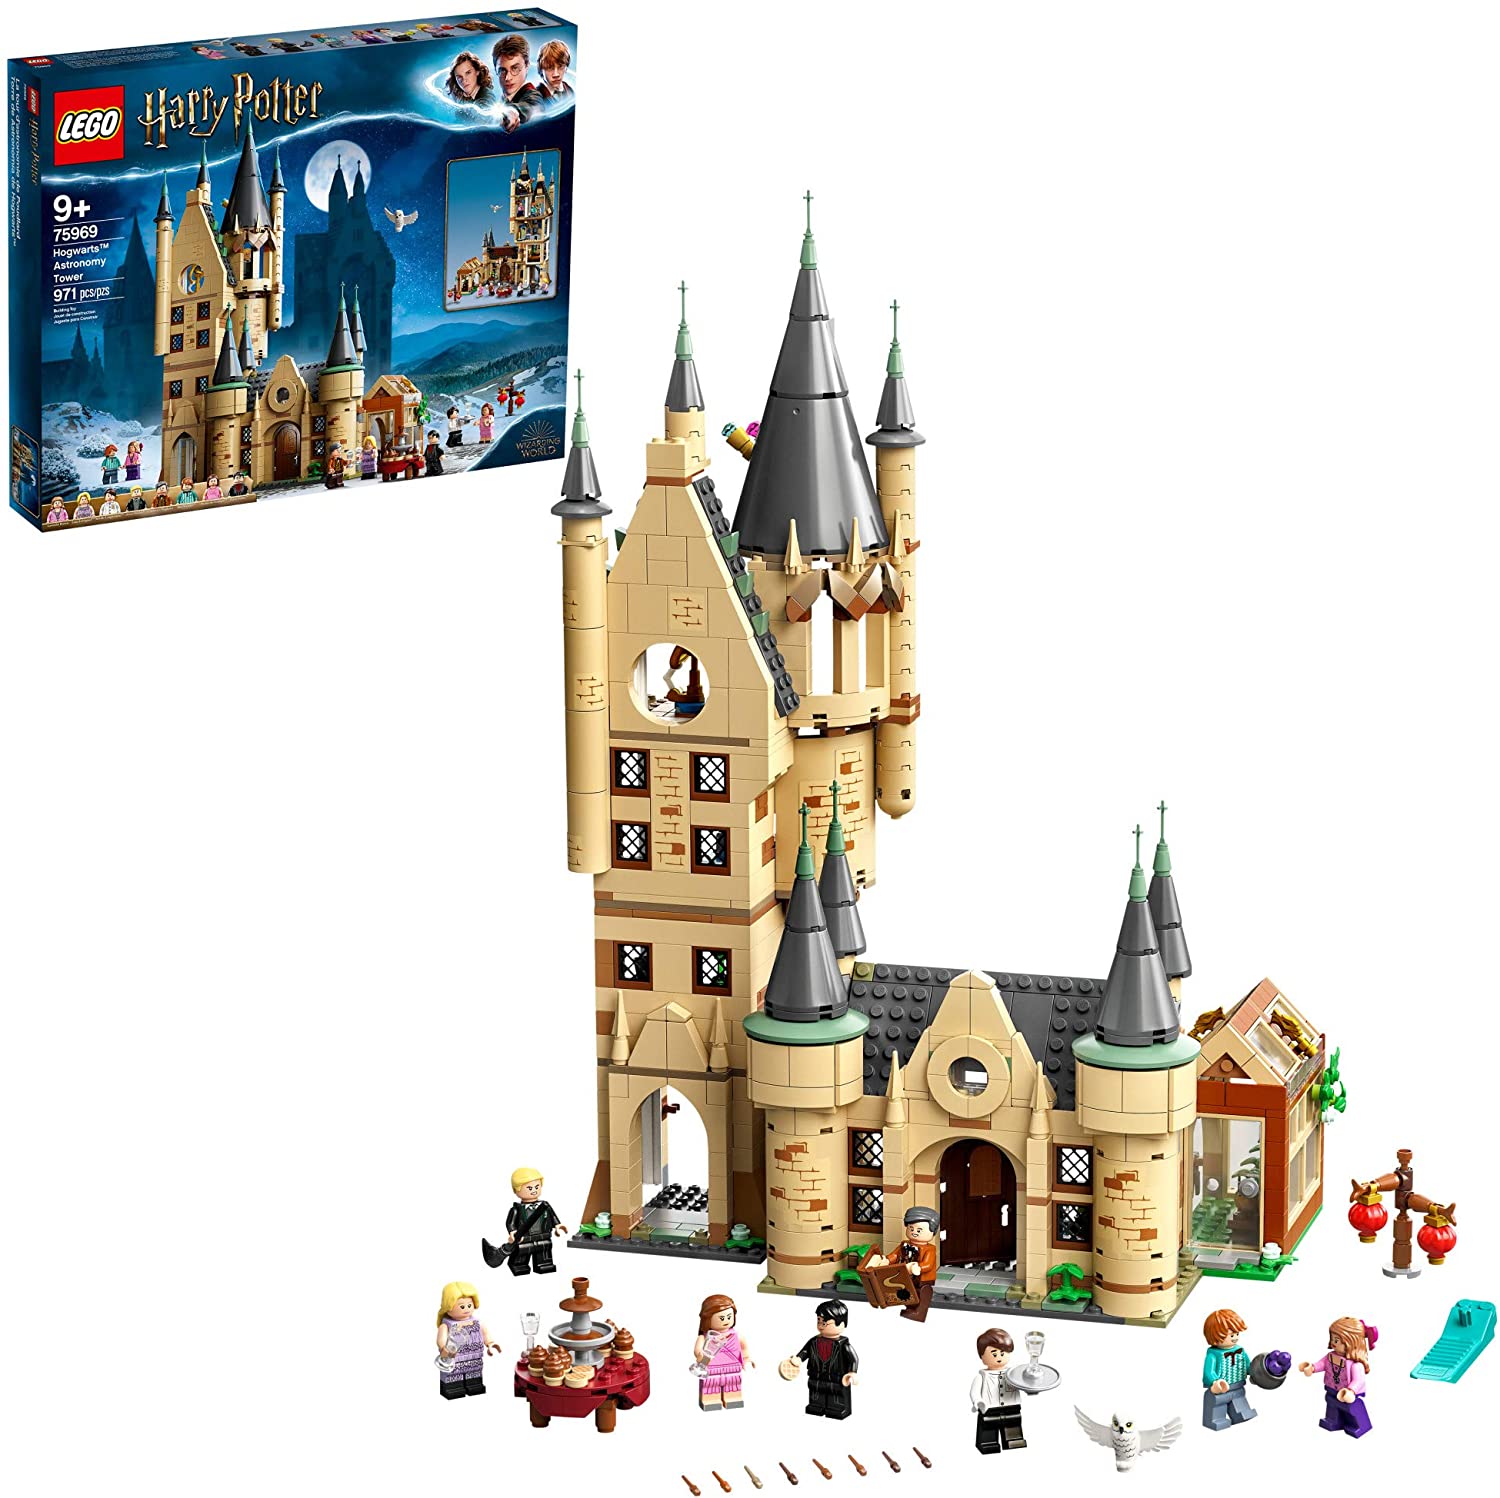 Various LEGO Harry Potter, Marvel, Minecraft, Super Mario, Star Wars, Speed sets up to 30% off at Amazon